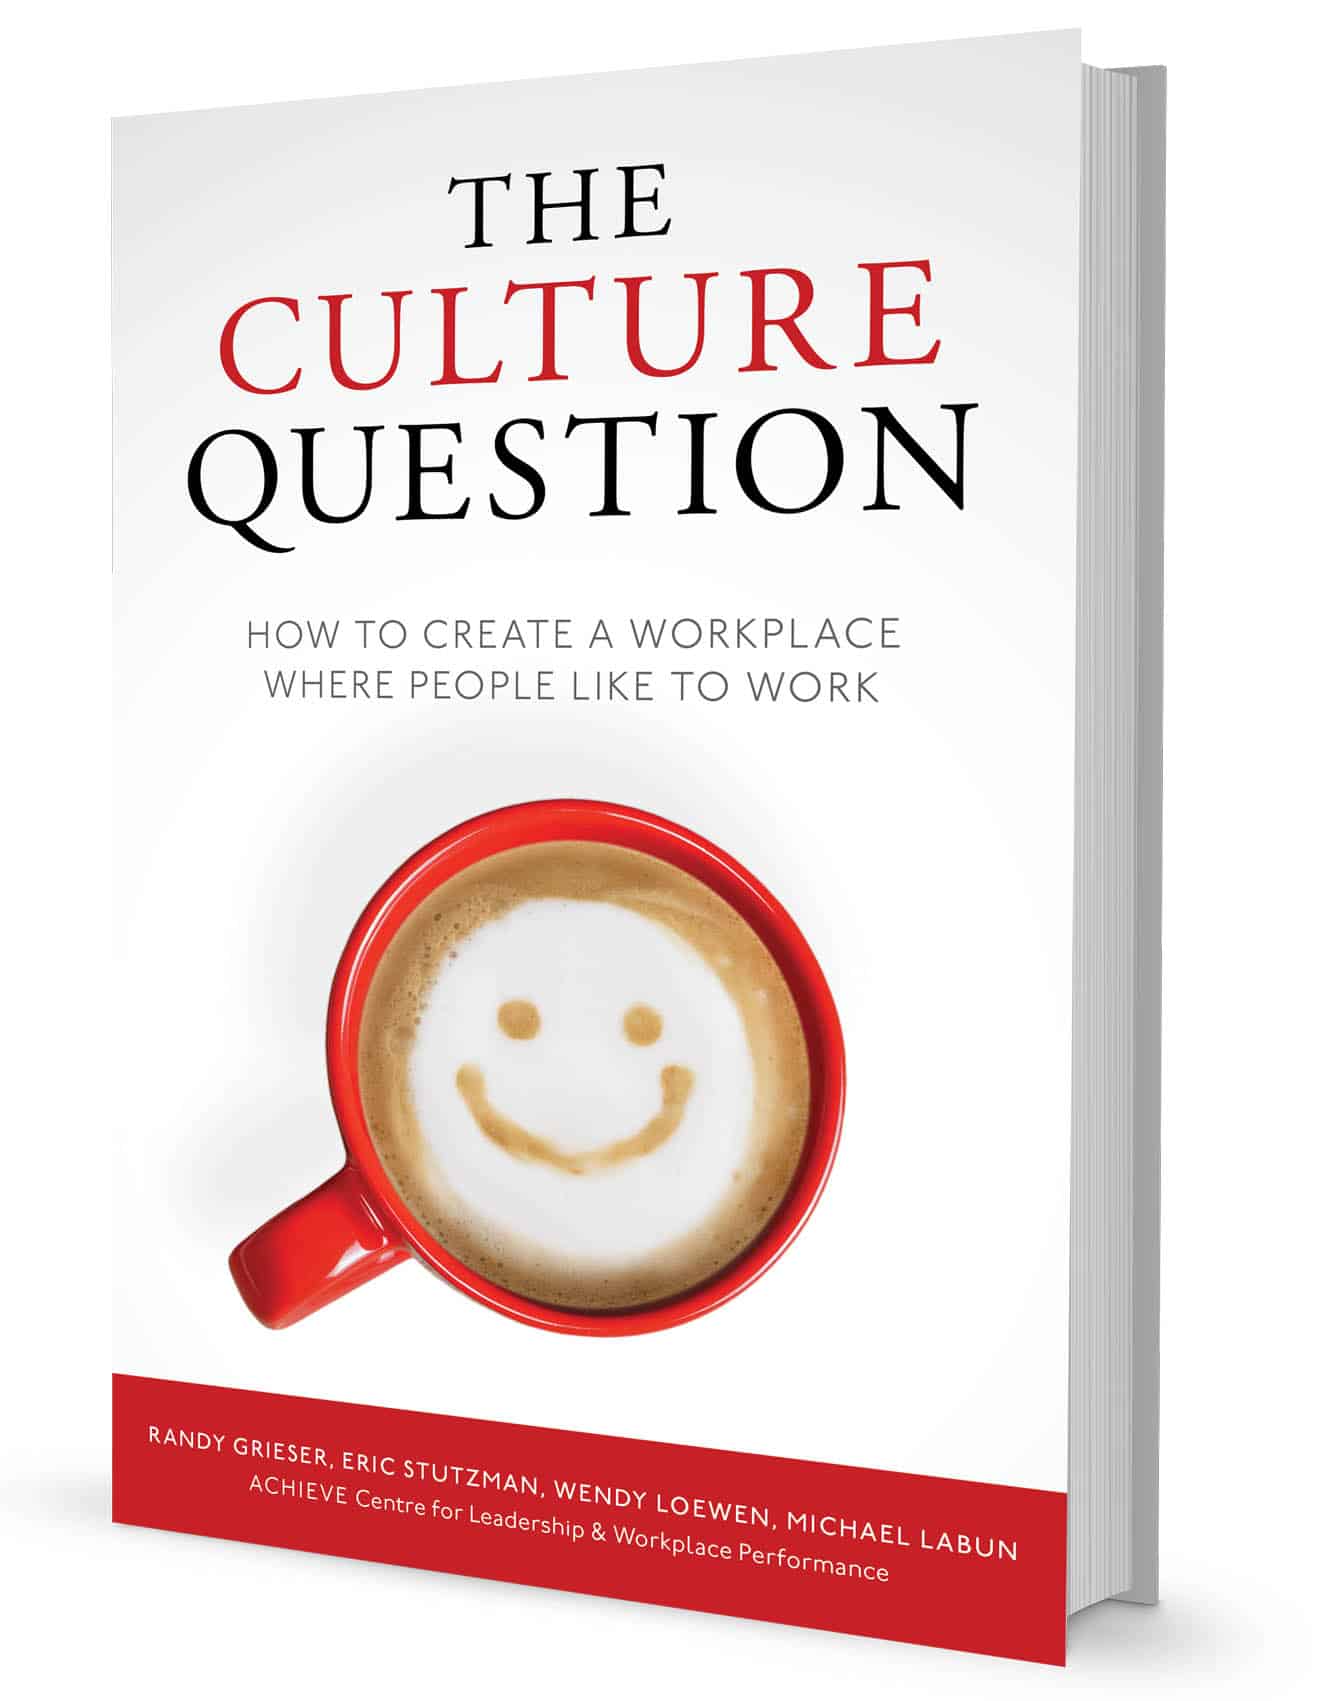 The Culture Question Book Cover